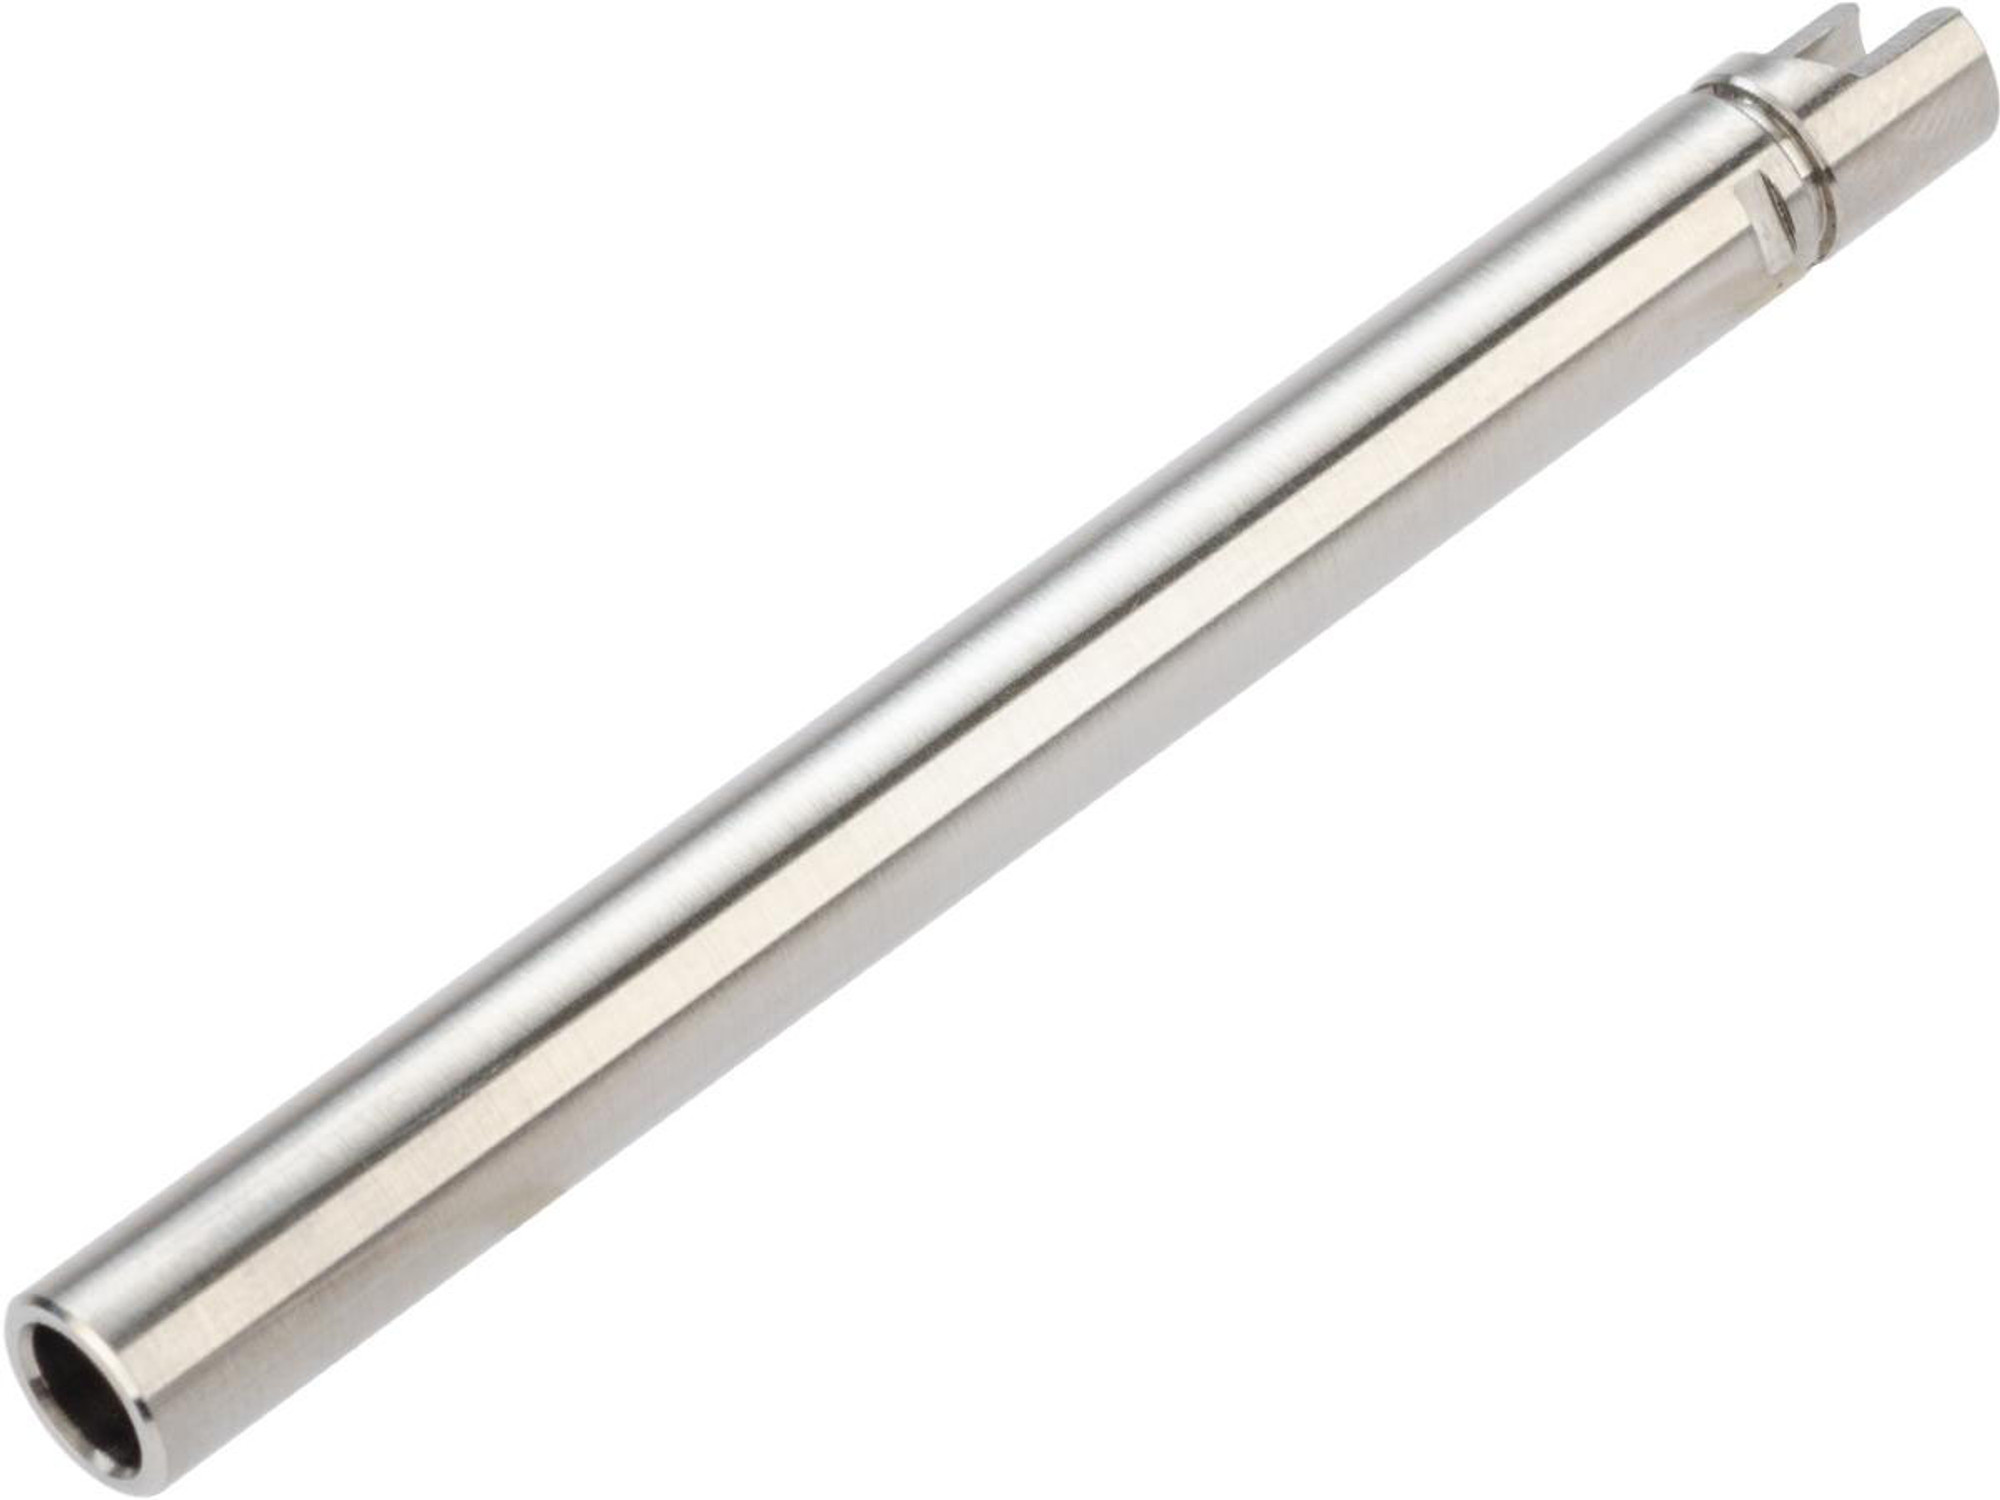 Lambda "One" Precision Stainless Steel 6.01mm Tight Bore Inner Barrel for Tokyo Marui GBB Pistols (Length: GLOCK 17/18 / SIG P226 / 97mm)